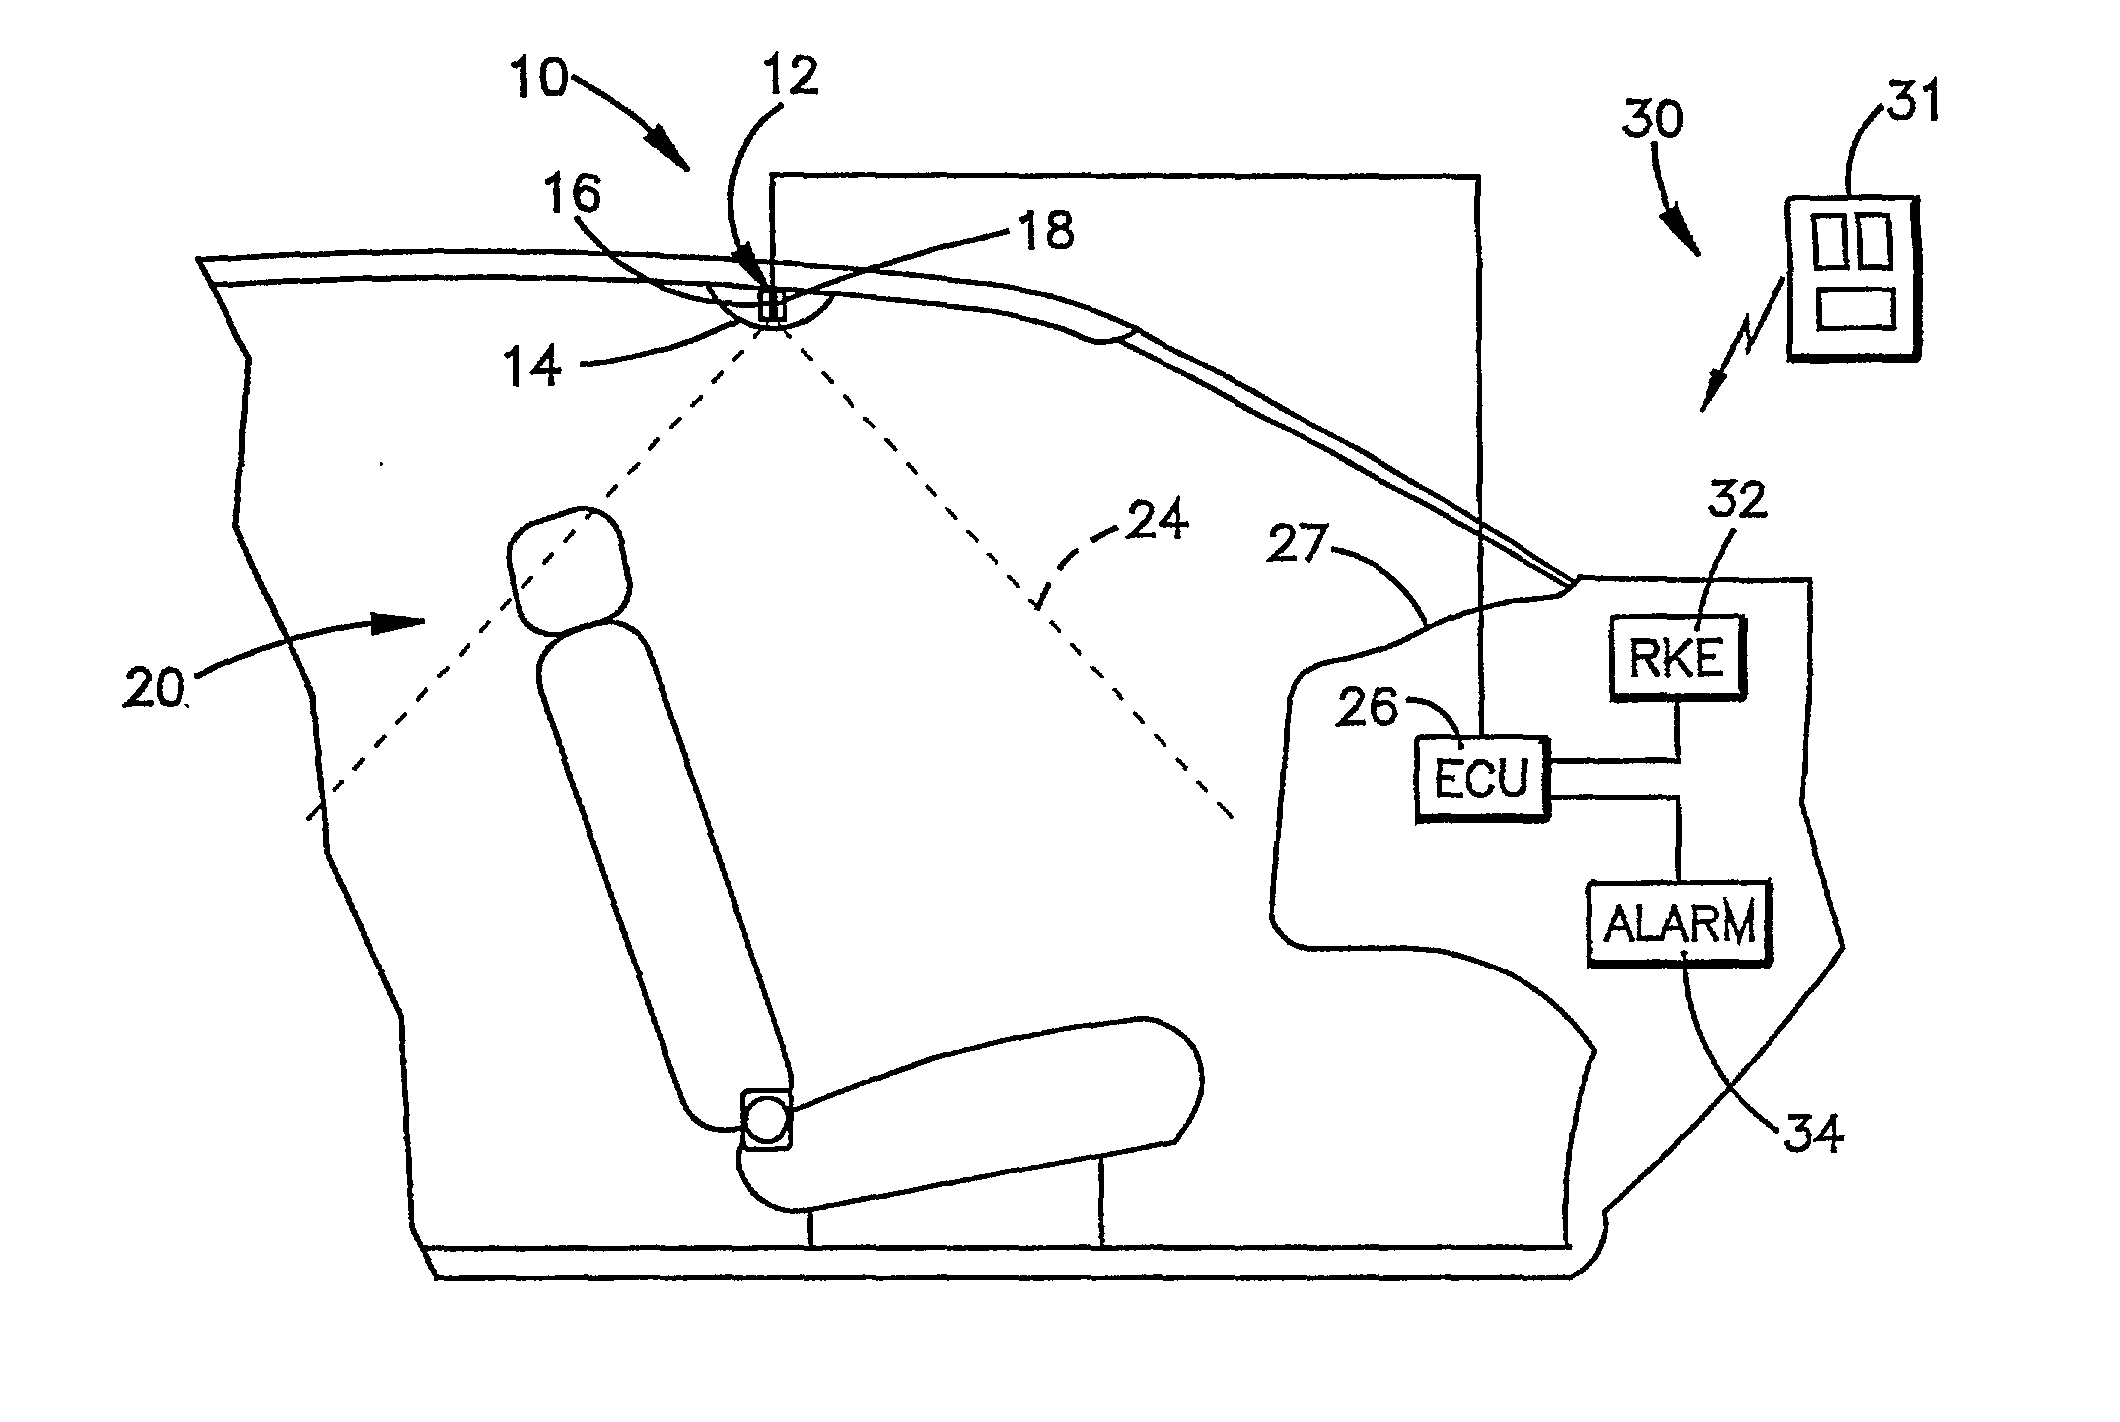 Method and apparatus for detecting intrusion and non-intrusion events